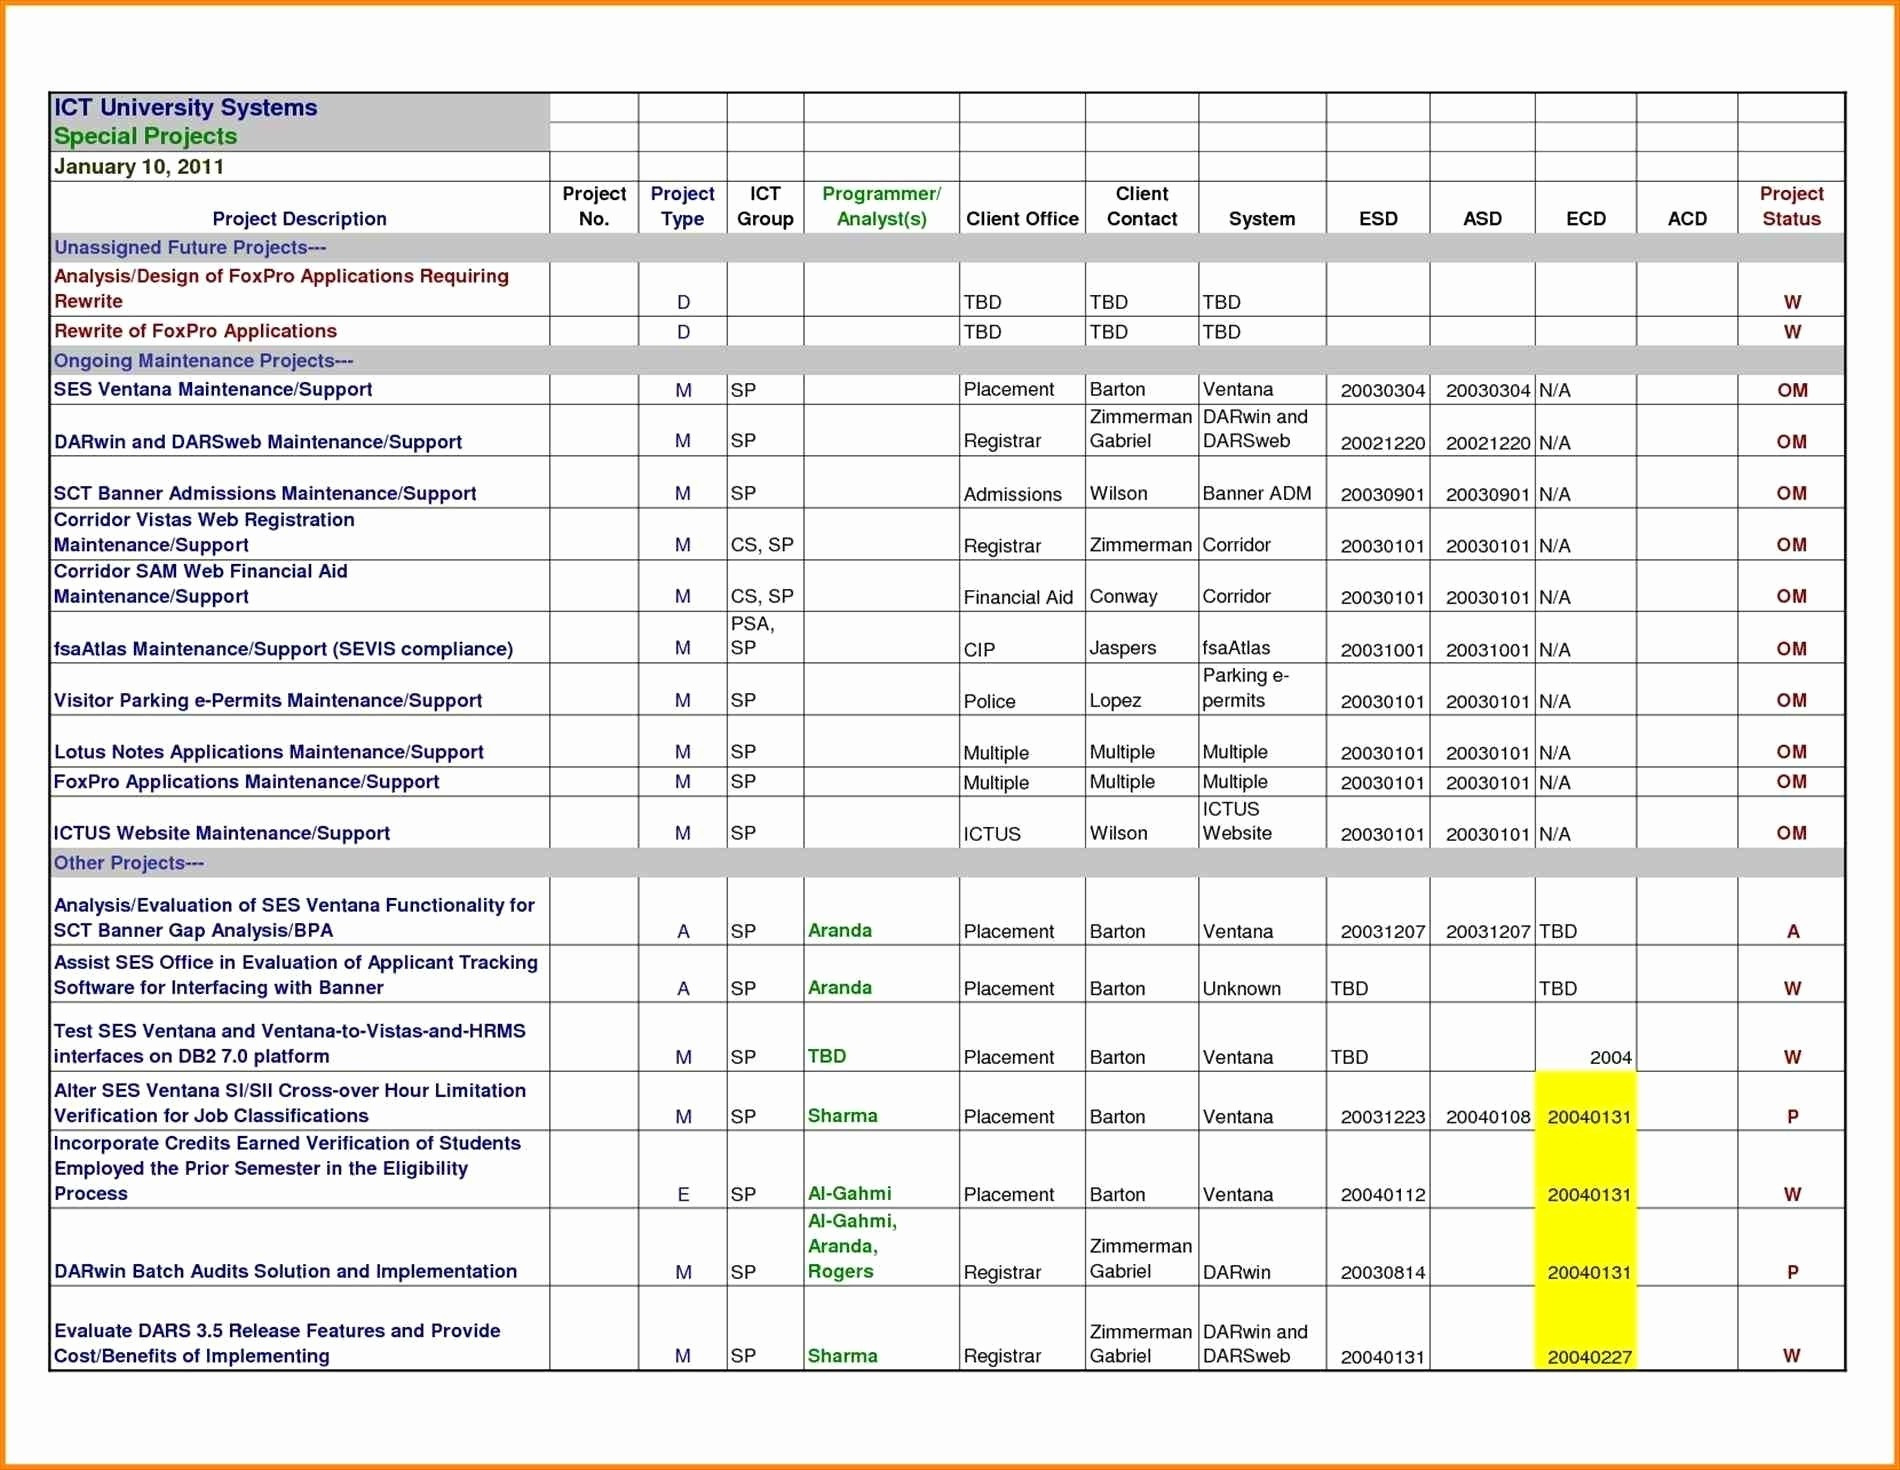 Applicant Tracking Spreadsheet Download Free – Spreadsheet Collections To Applicant Tracking Spreadsheet